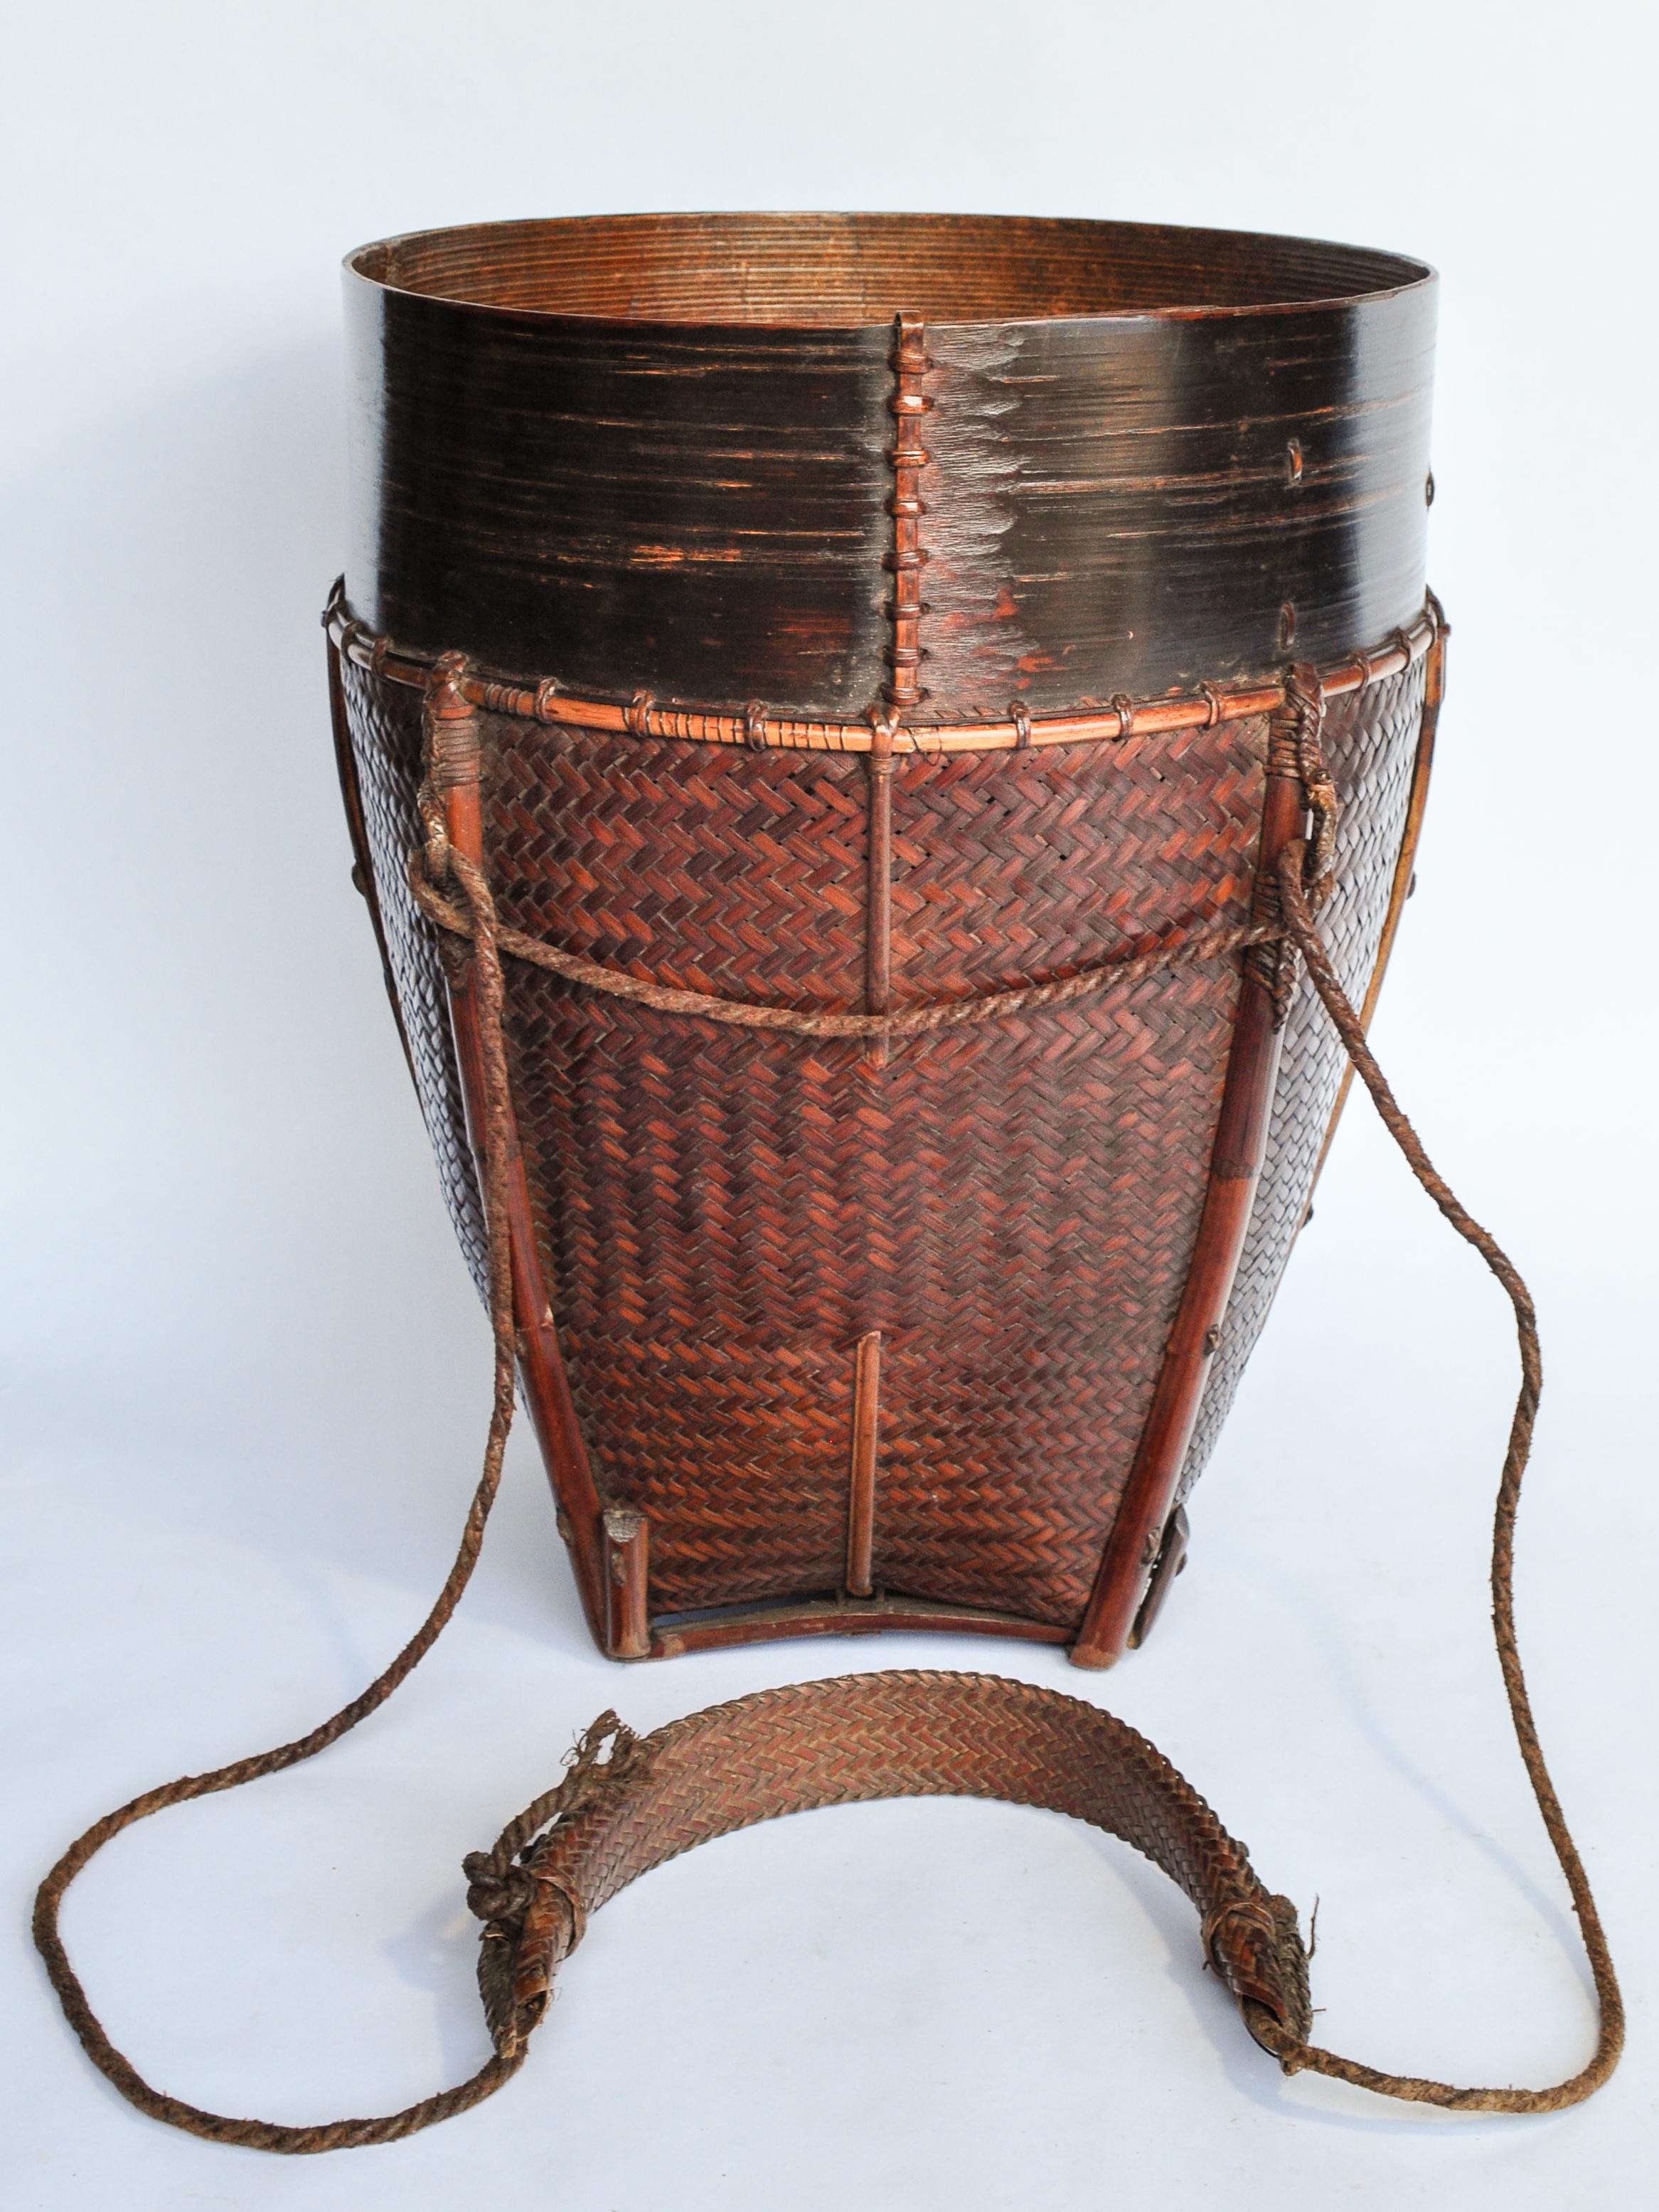 Vintage bamboo carrying and storage basket with strap, from the Rawang People of Burma, Mid-20th Century.
This cleanly woven utilitarian basket was used in a variety of tasks, to transport and store any number of items in the rounds of daily